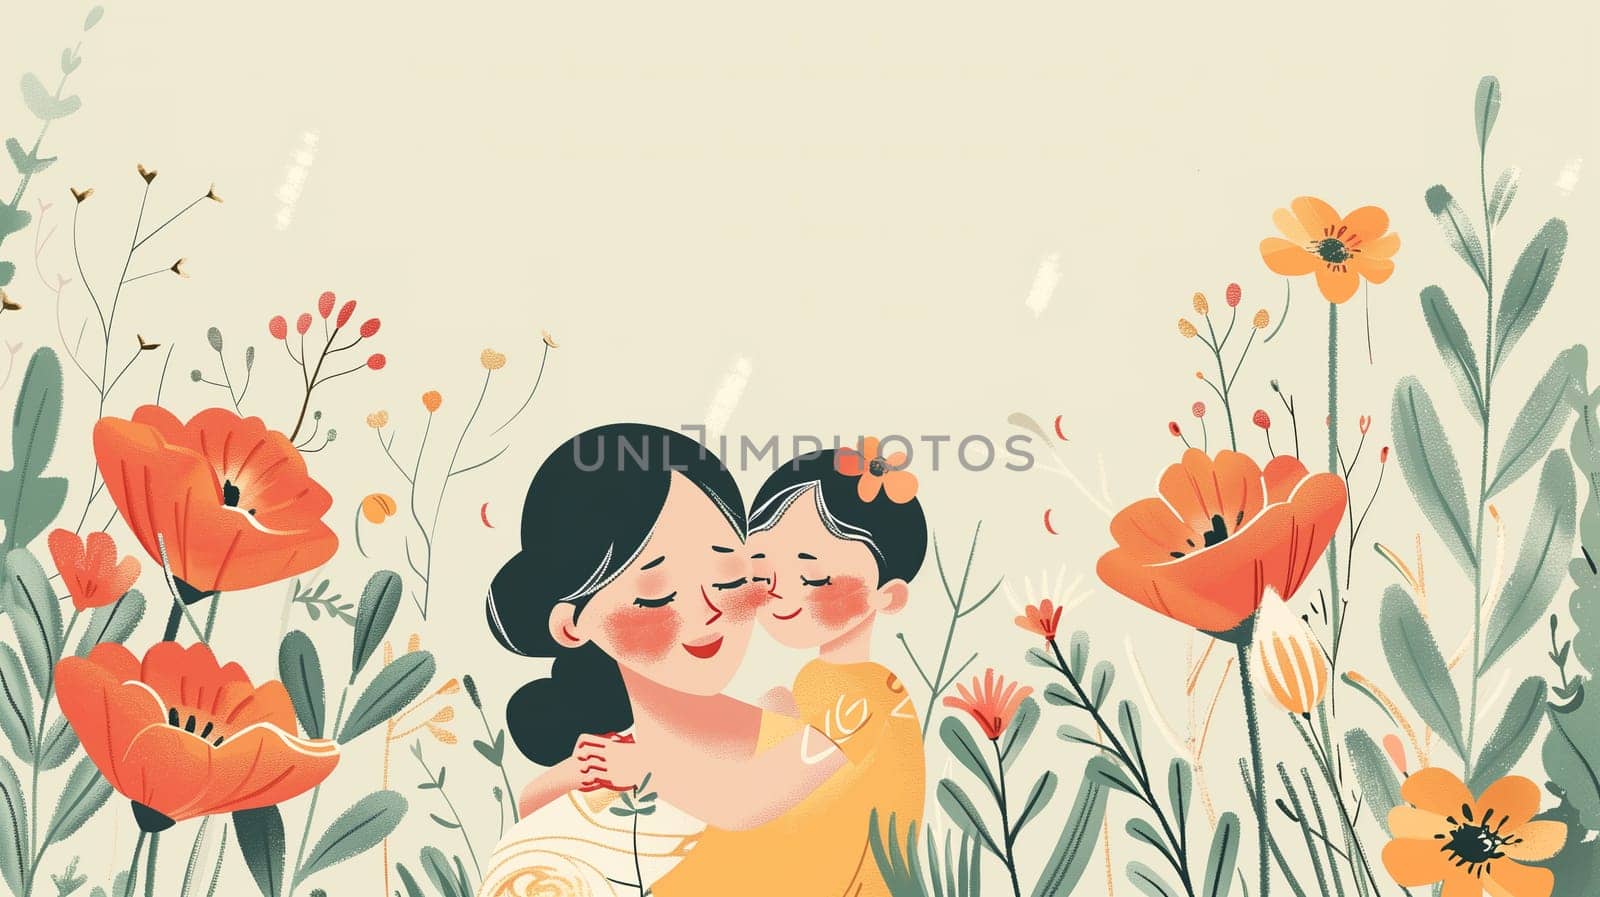 Two Kids Hugging in a Field of Flowers by TRMK